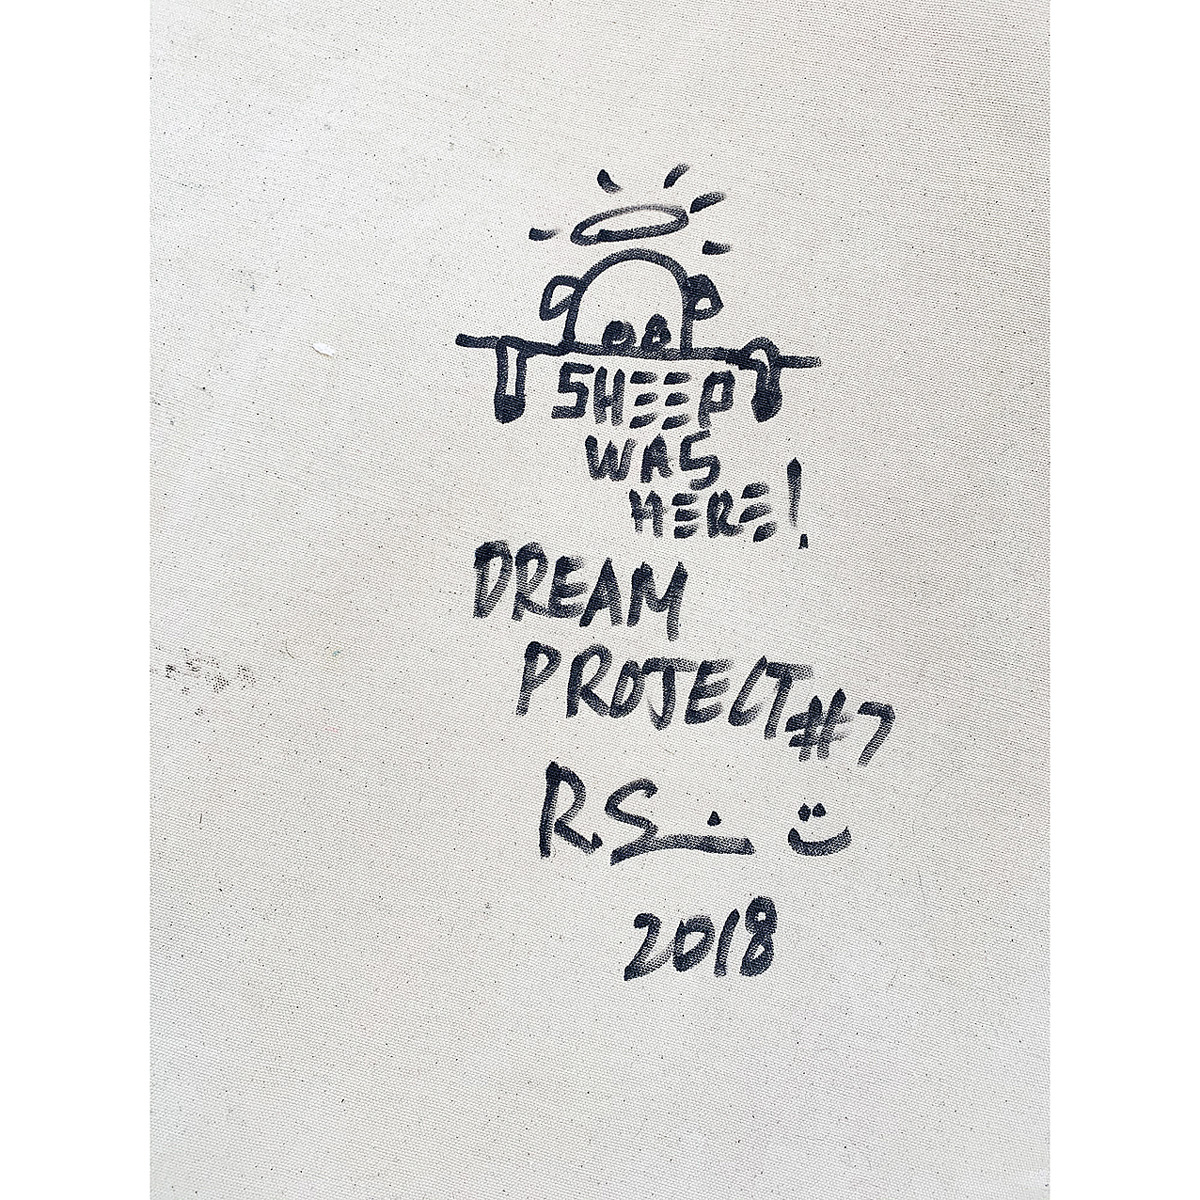 Dream Project #7, 2018 by Little Ricky